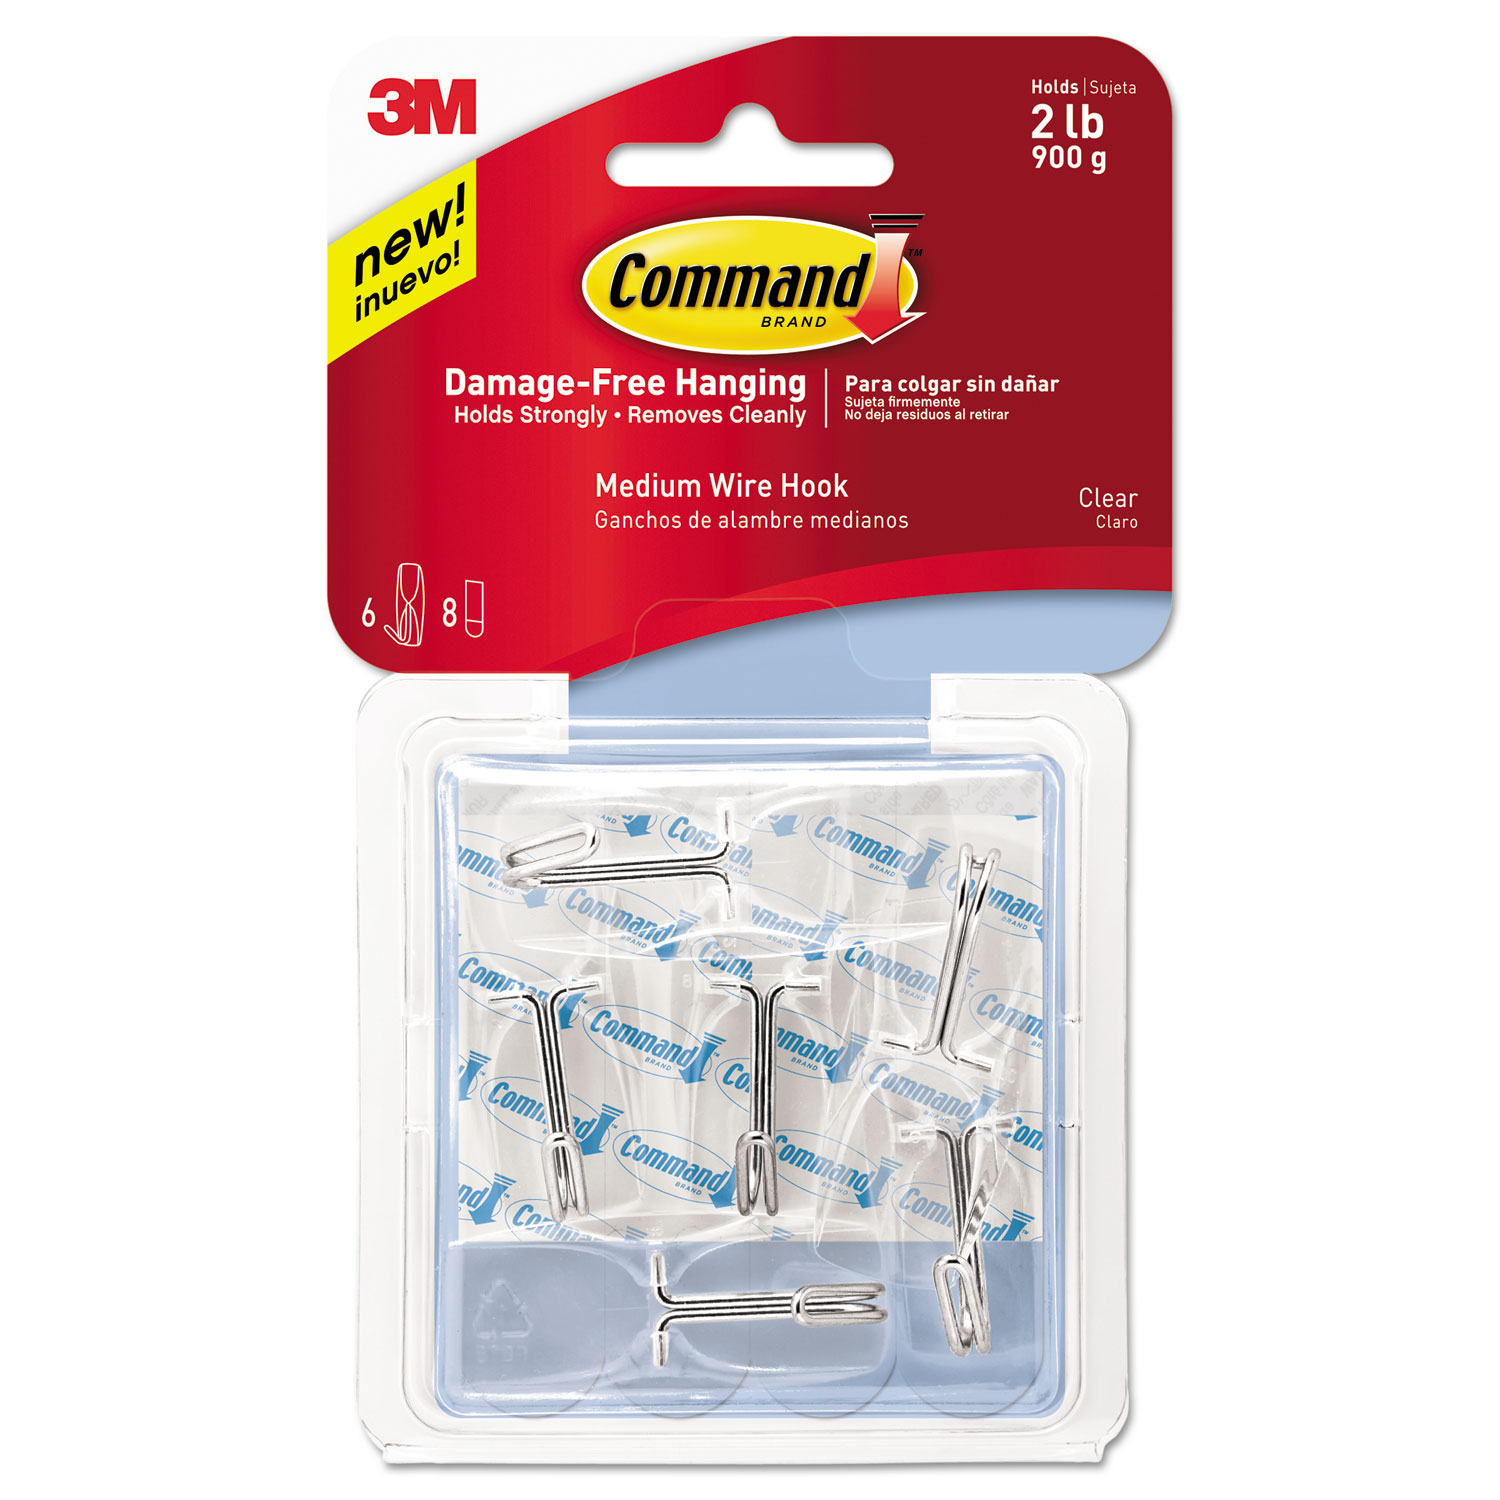 3M Clips, Hooks & Adhesive Strips for Industrial Maintenance & Repair